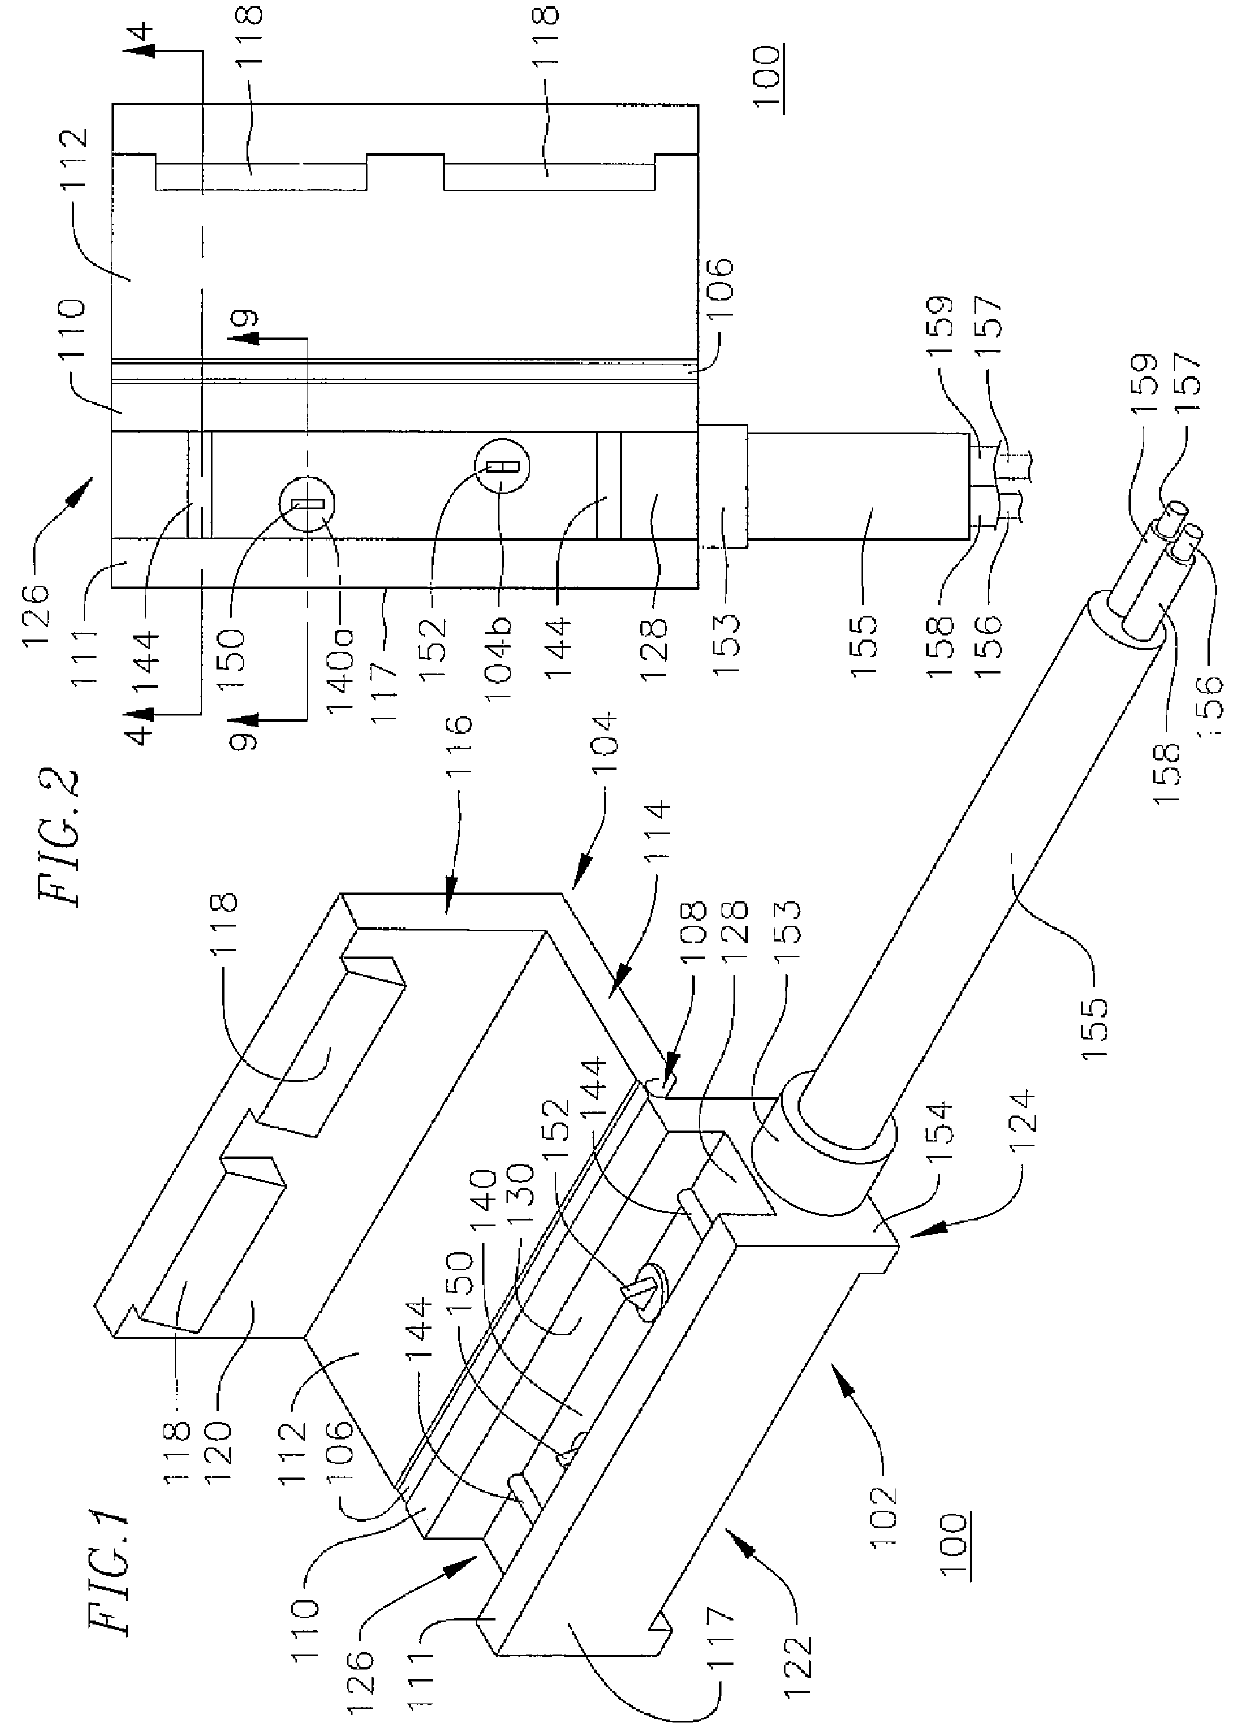 Connector assembly and method for using